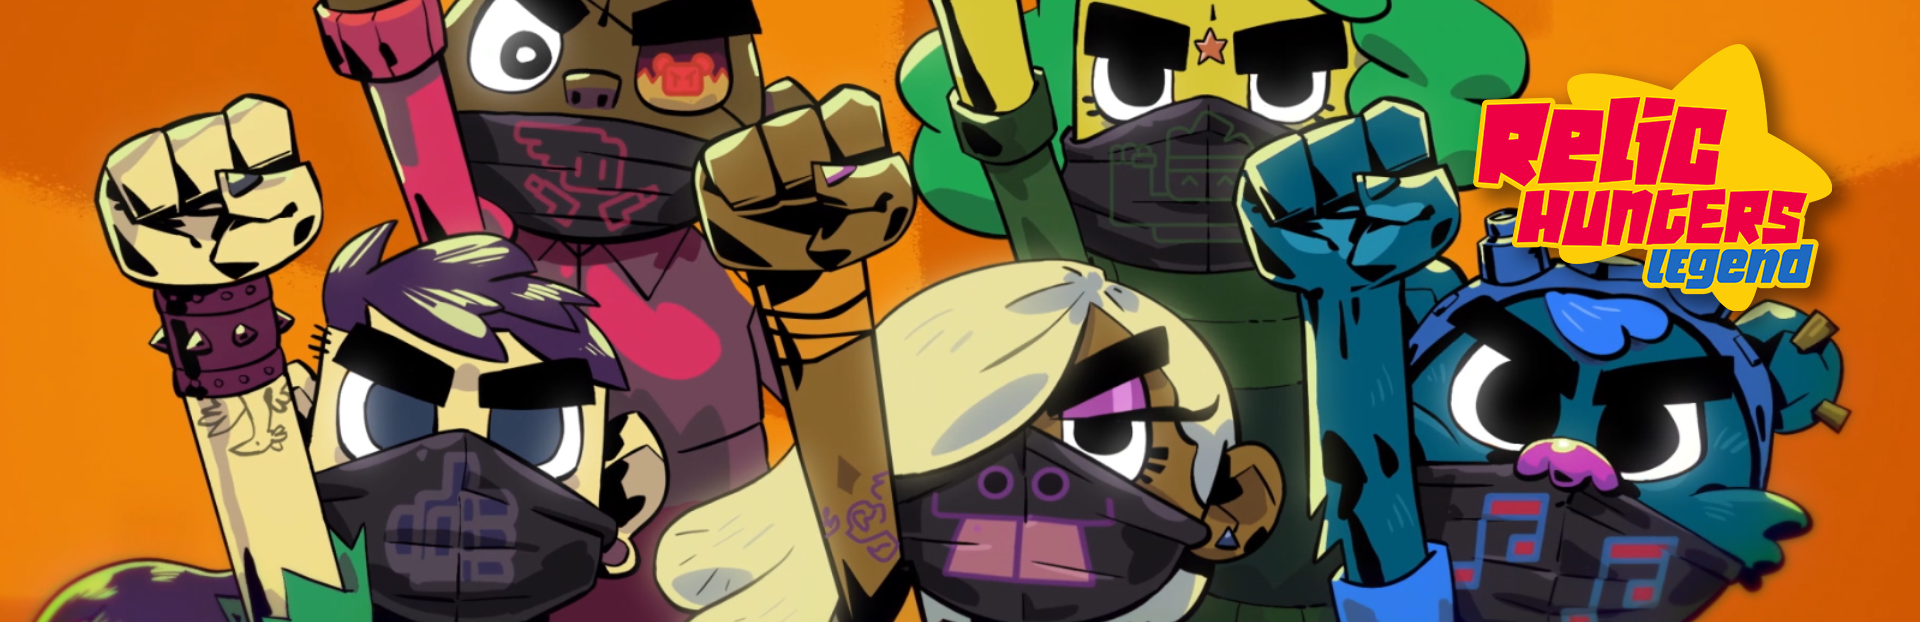 Relic Hunters Legend Announced at PAX East 2022 from Rogue Snail